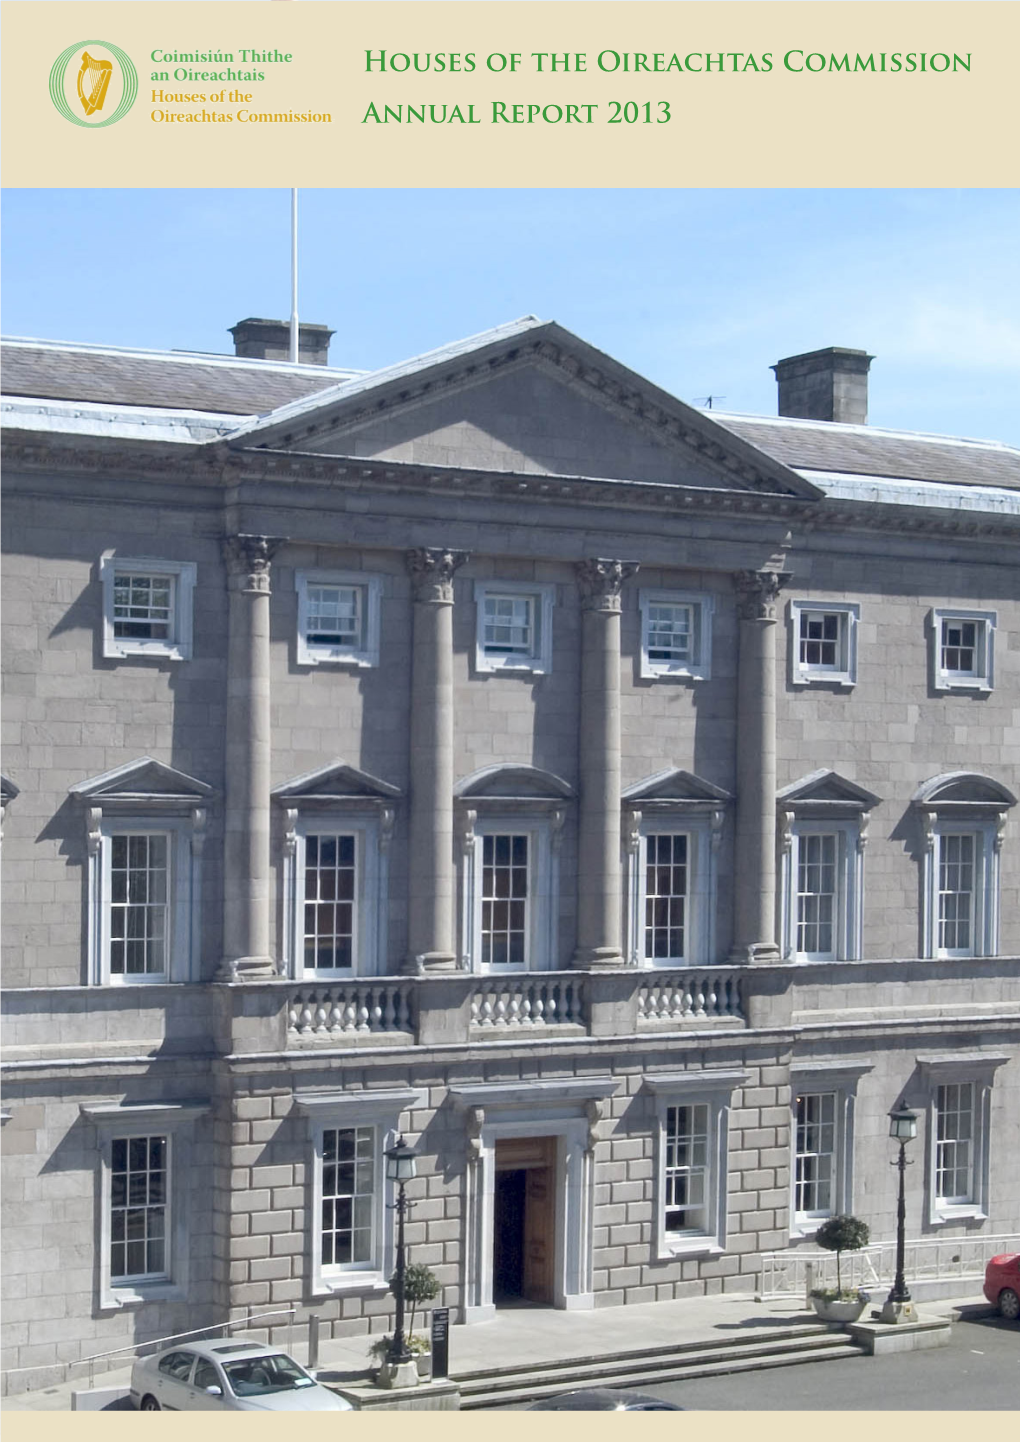 Houses of the Oireachtas Commission Annual Report 2013